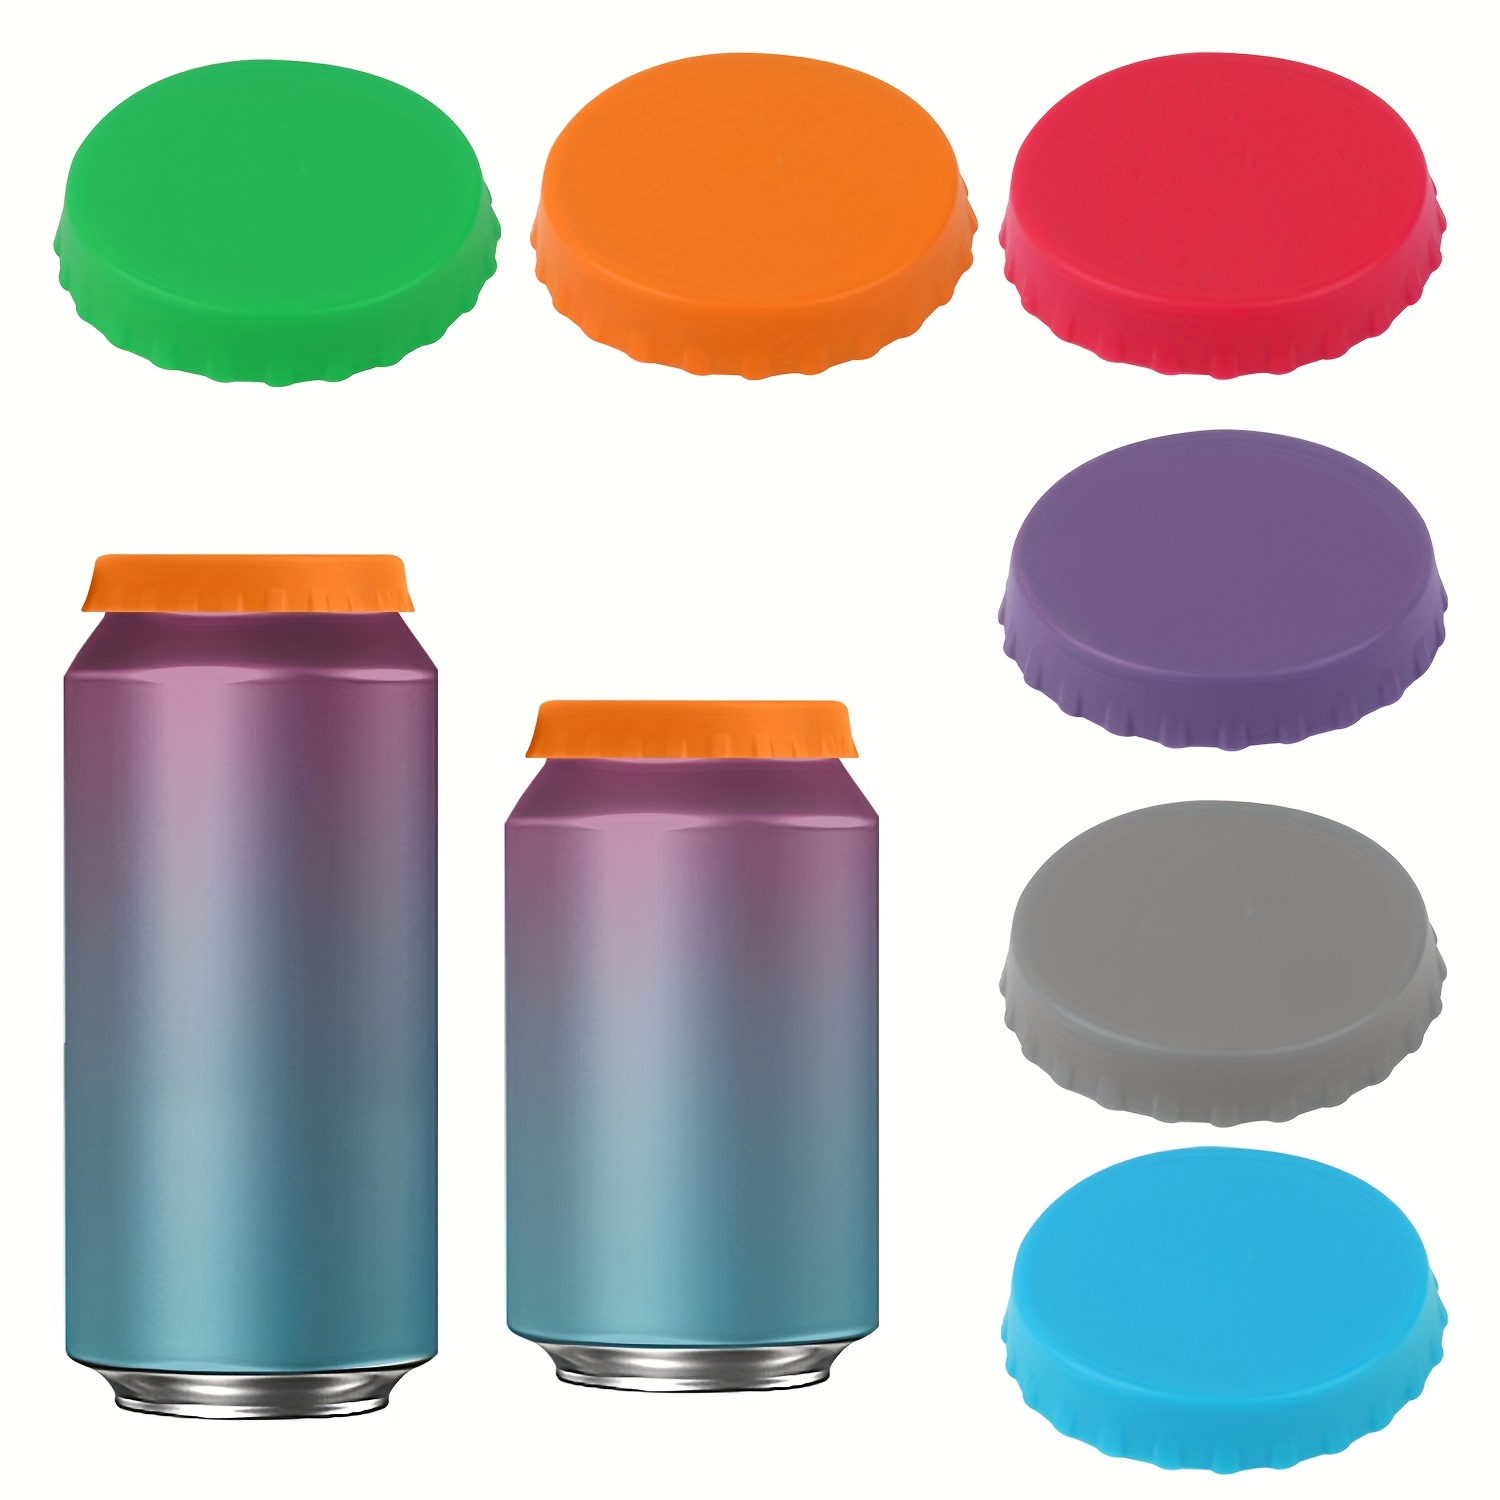 

1/6pcs Silicone Soda Can Lids, Bpa-free Reusable Silicone Can Covers, Can Stopper Or Protector For Soda, Beer, Drink, Juice, Beverage, Fits Standard Cans